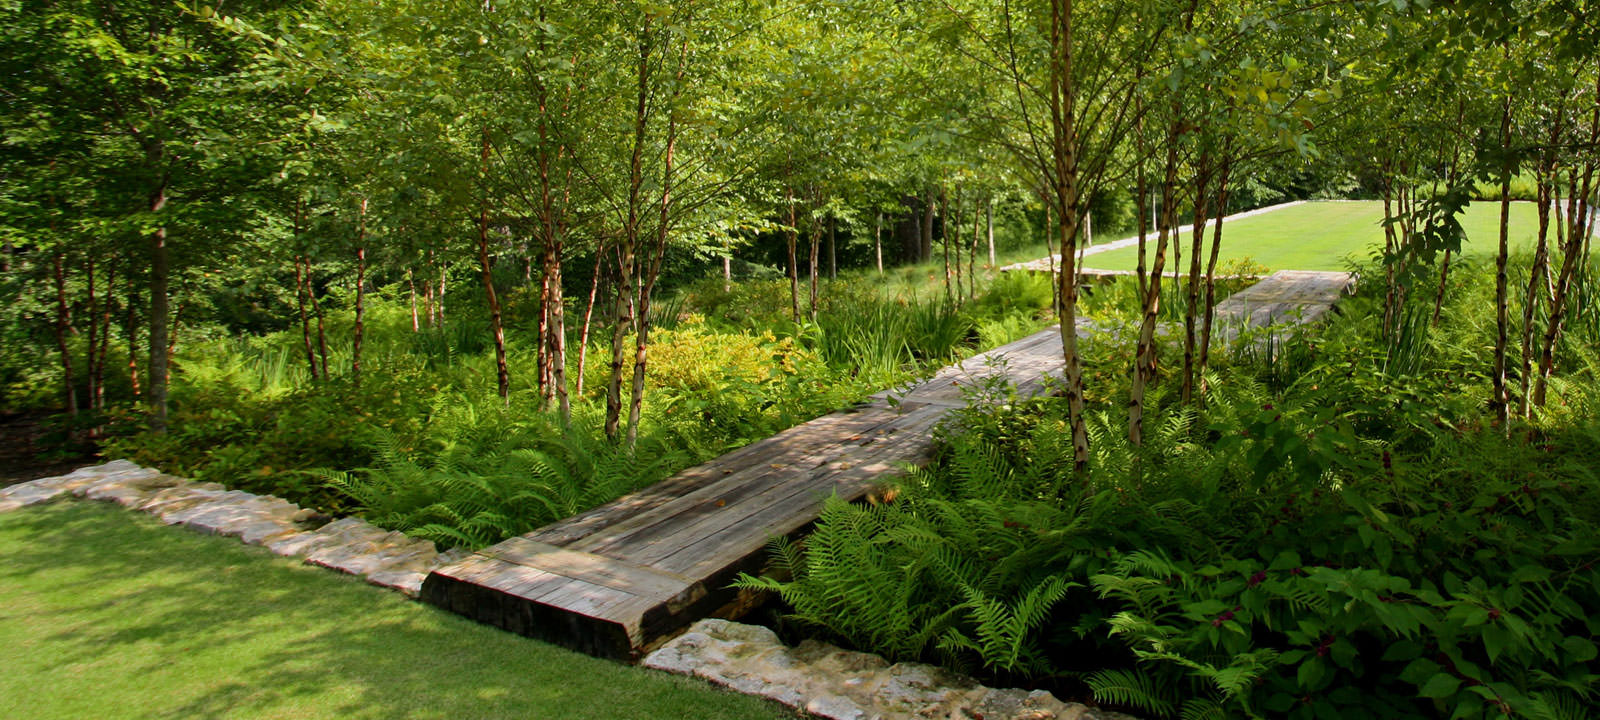 American Society Of Landscape Architects, How To Find A Landscape Architect